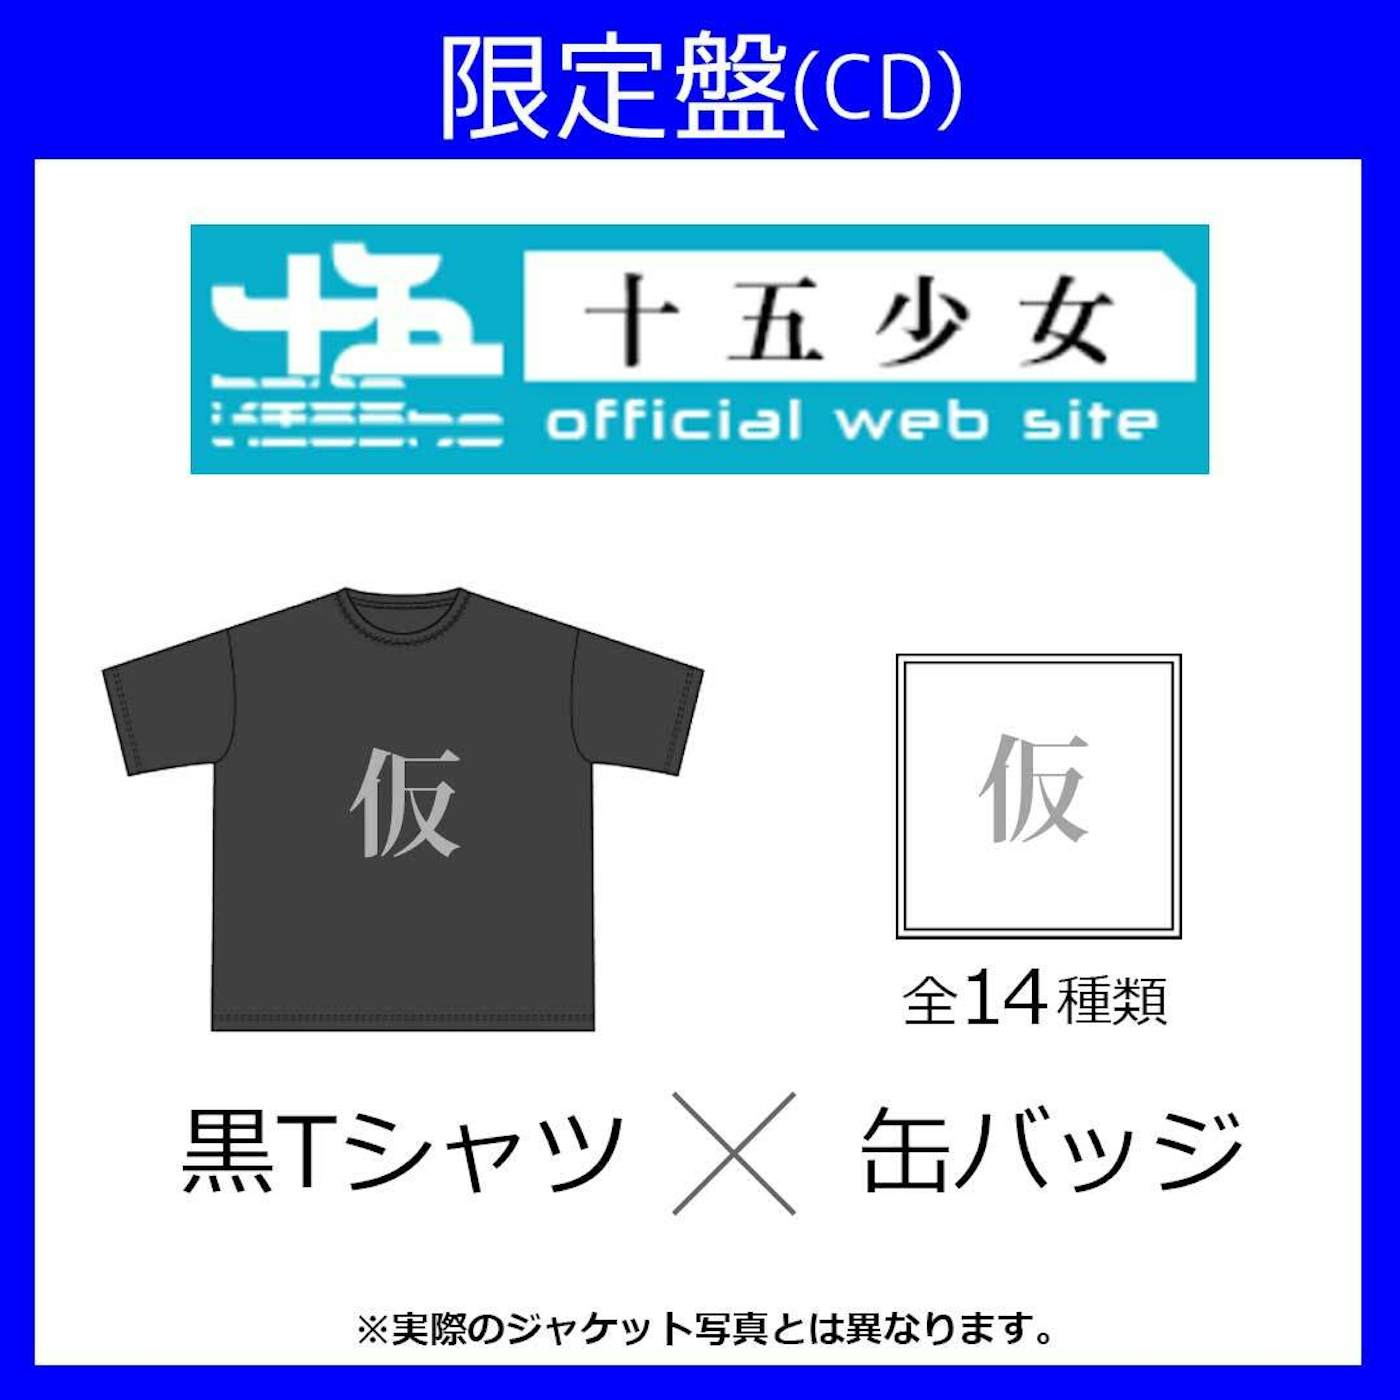 Fifteen voices ≪限定セット：缶バッジ×黒Tシャツ(XL)≫SILENTHATED(2枚組AL+スマプラ)